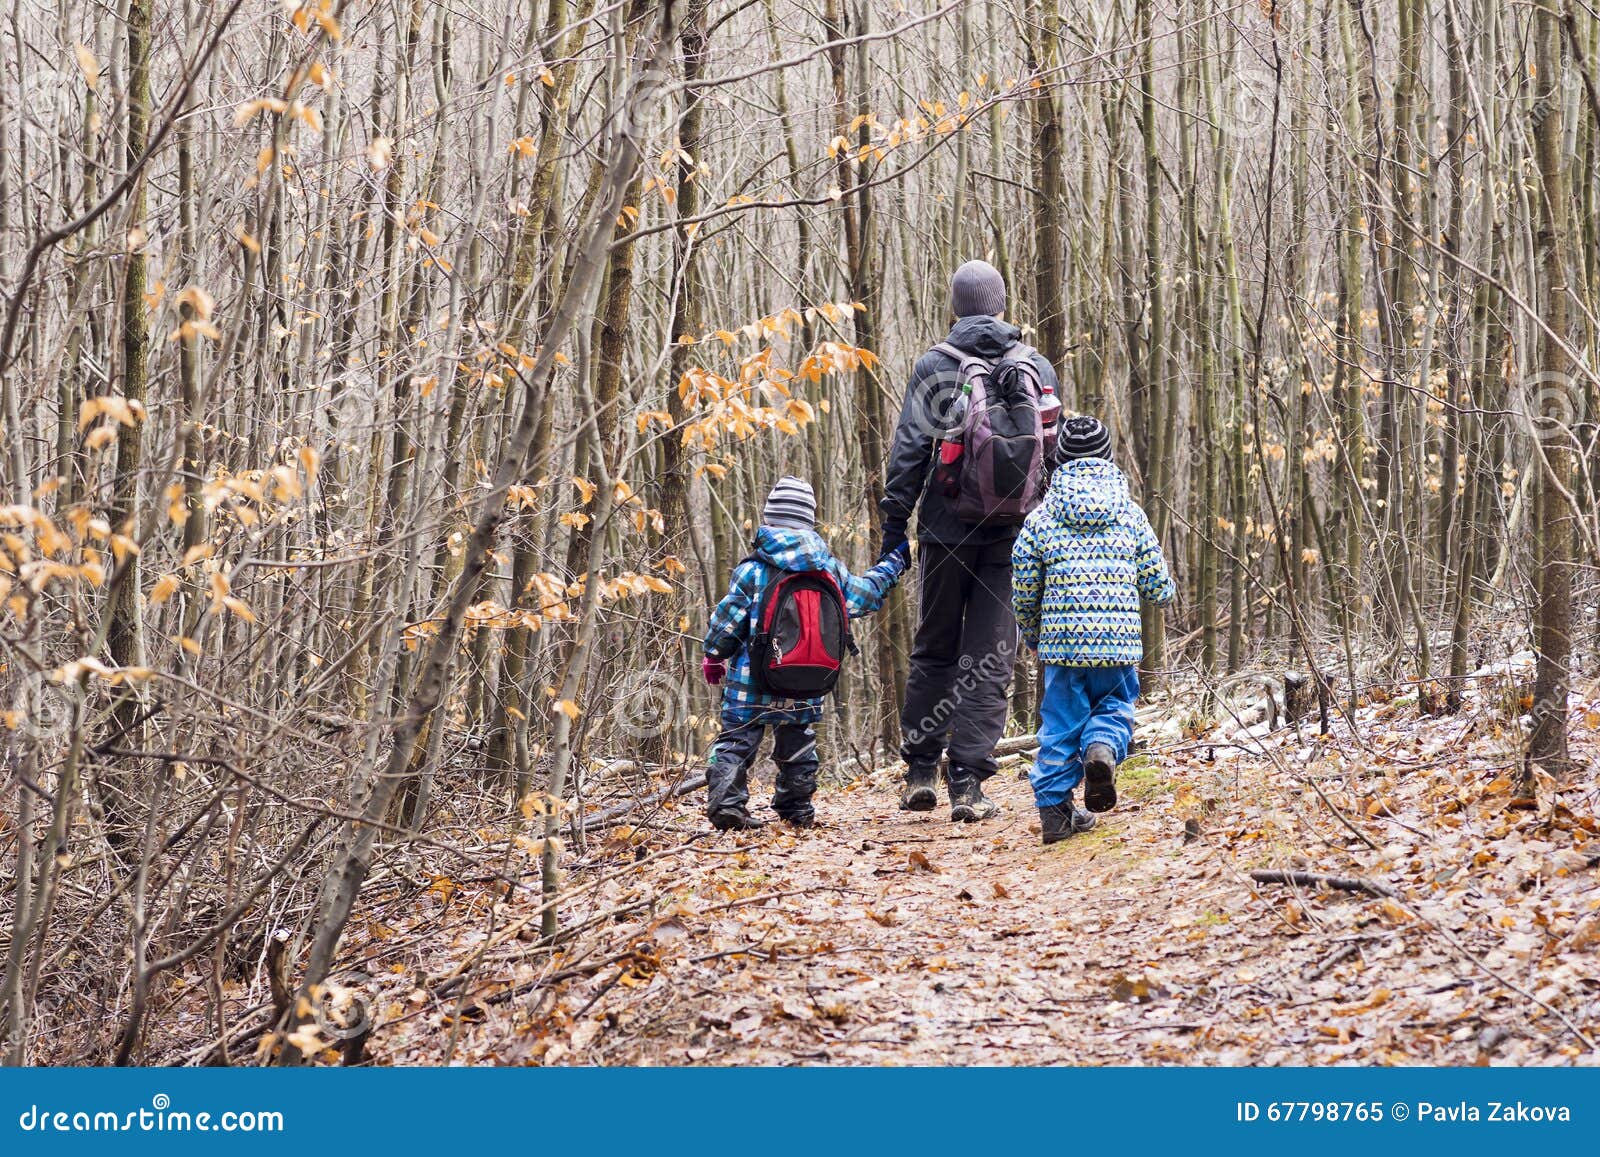 family walking in forest